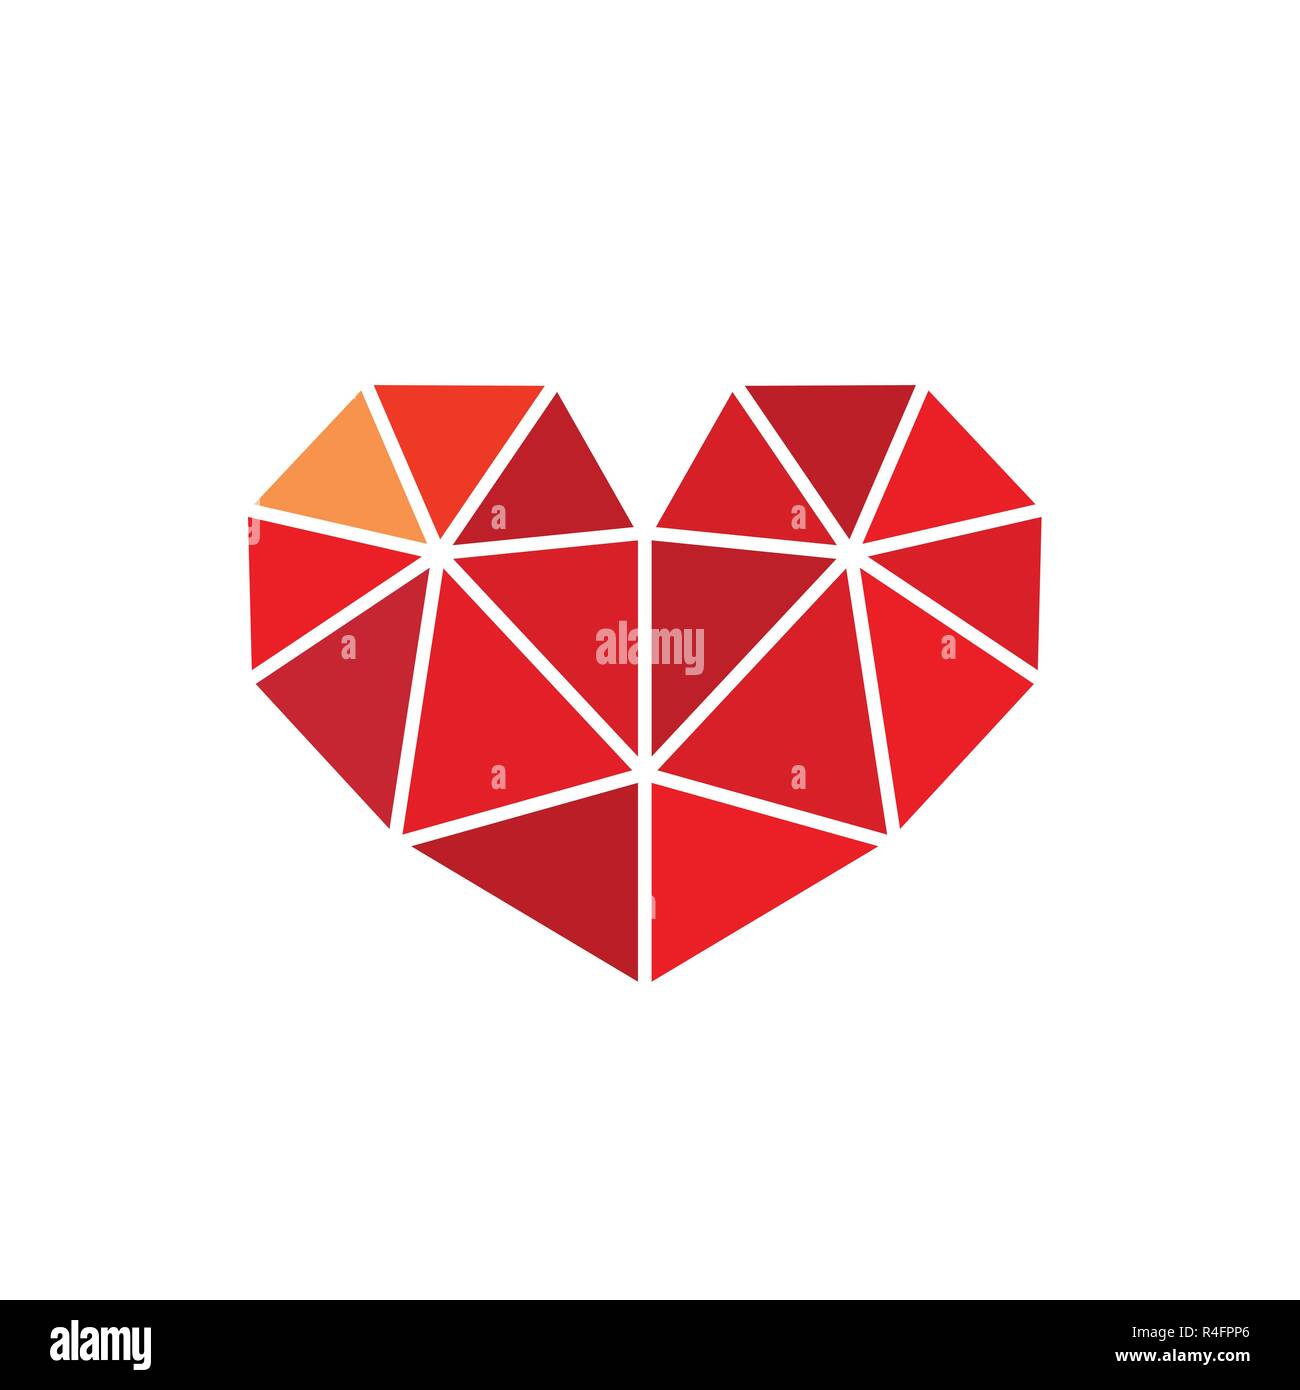 Low Poly Style Heart Love Symbol. Available in editable EPS vector format. Isolated on white background. Stock Vector